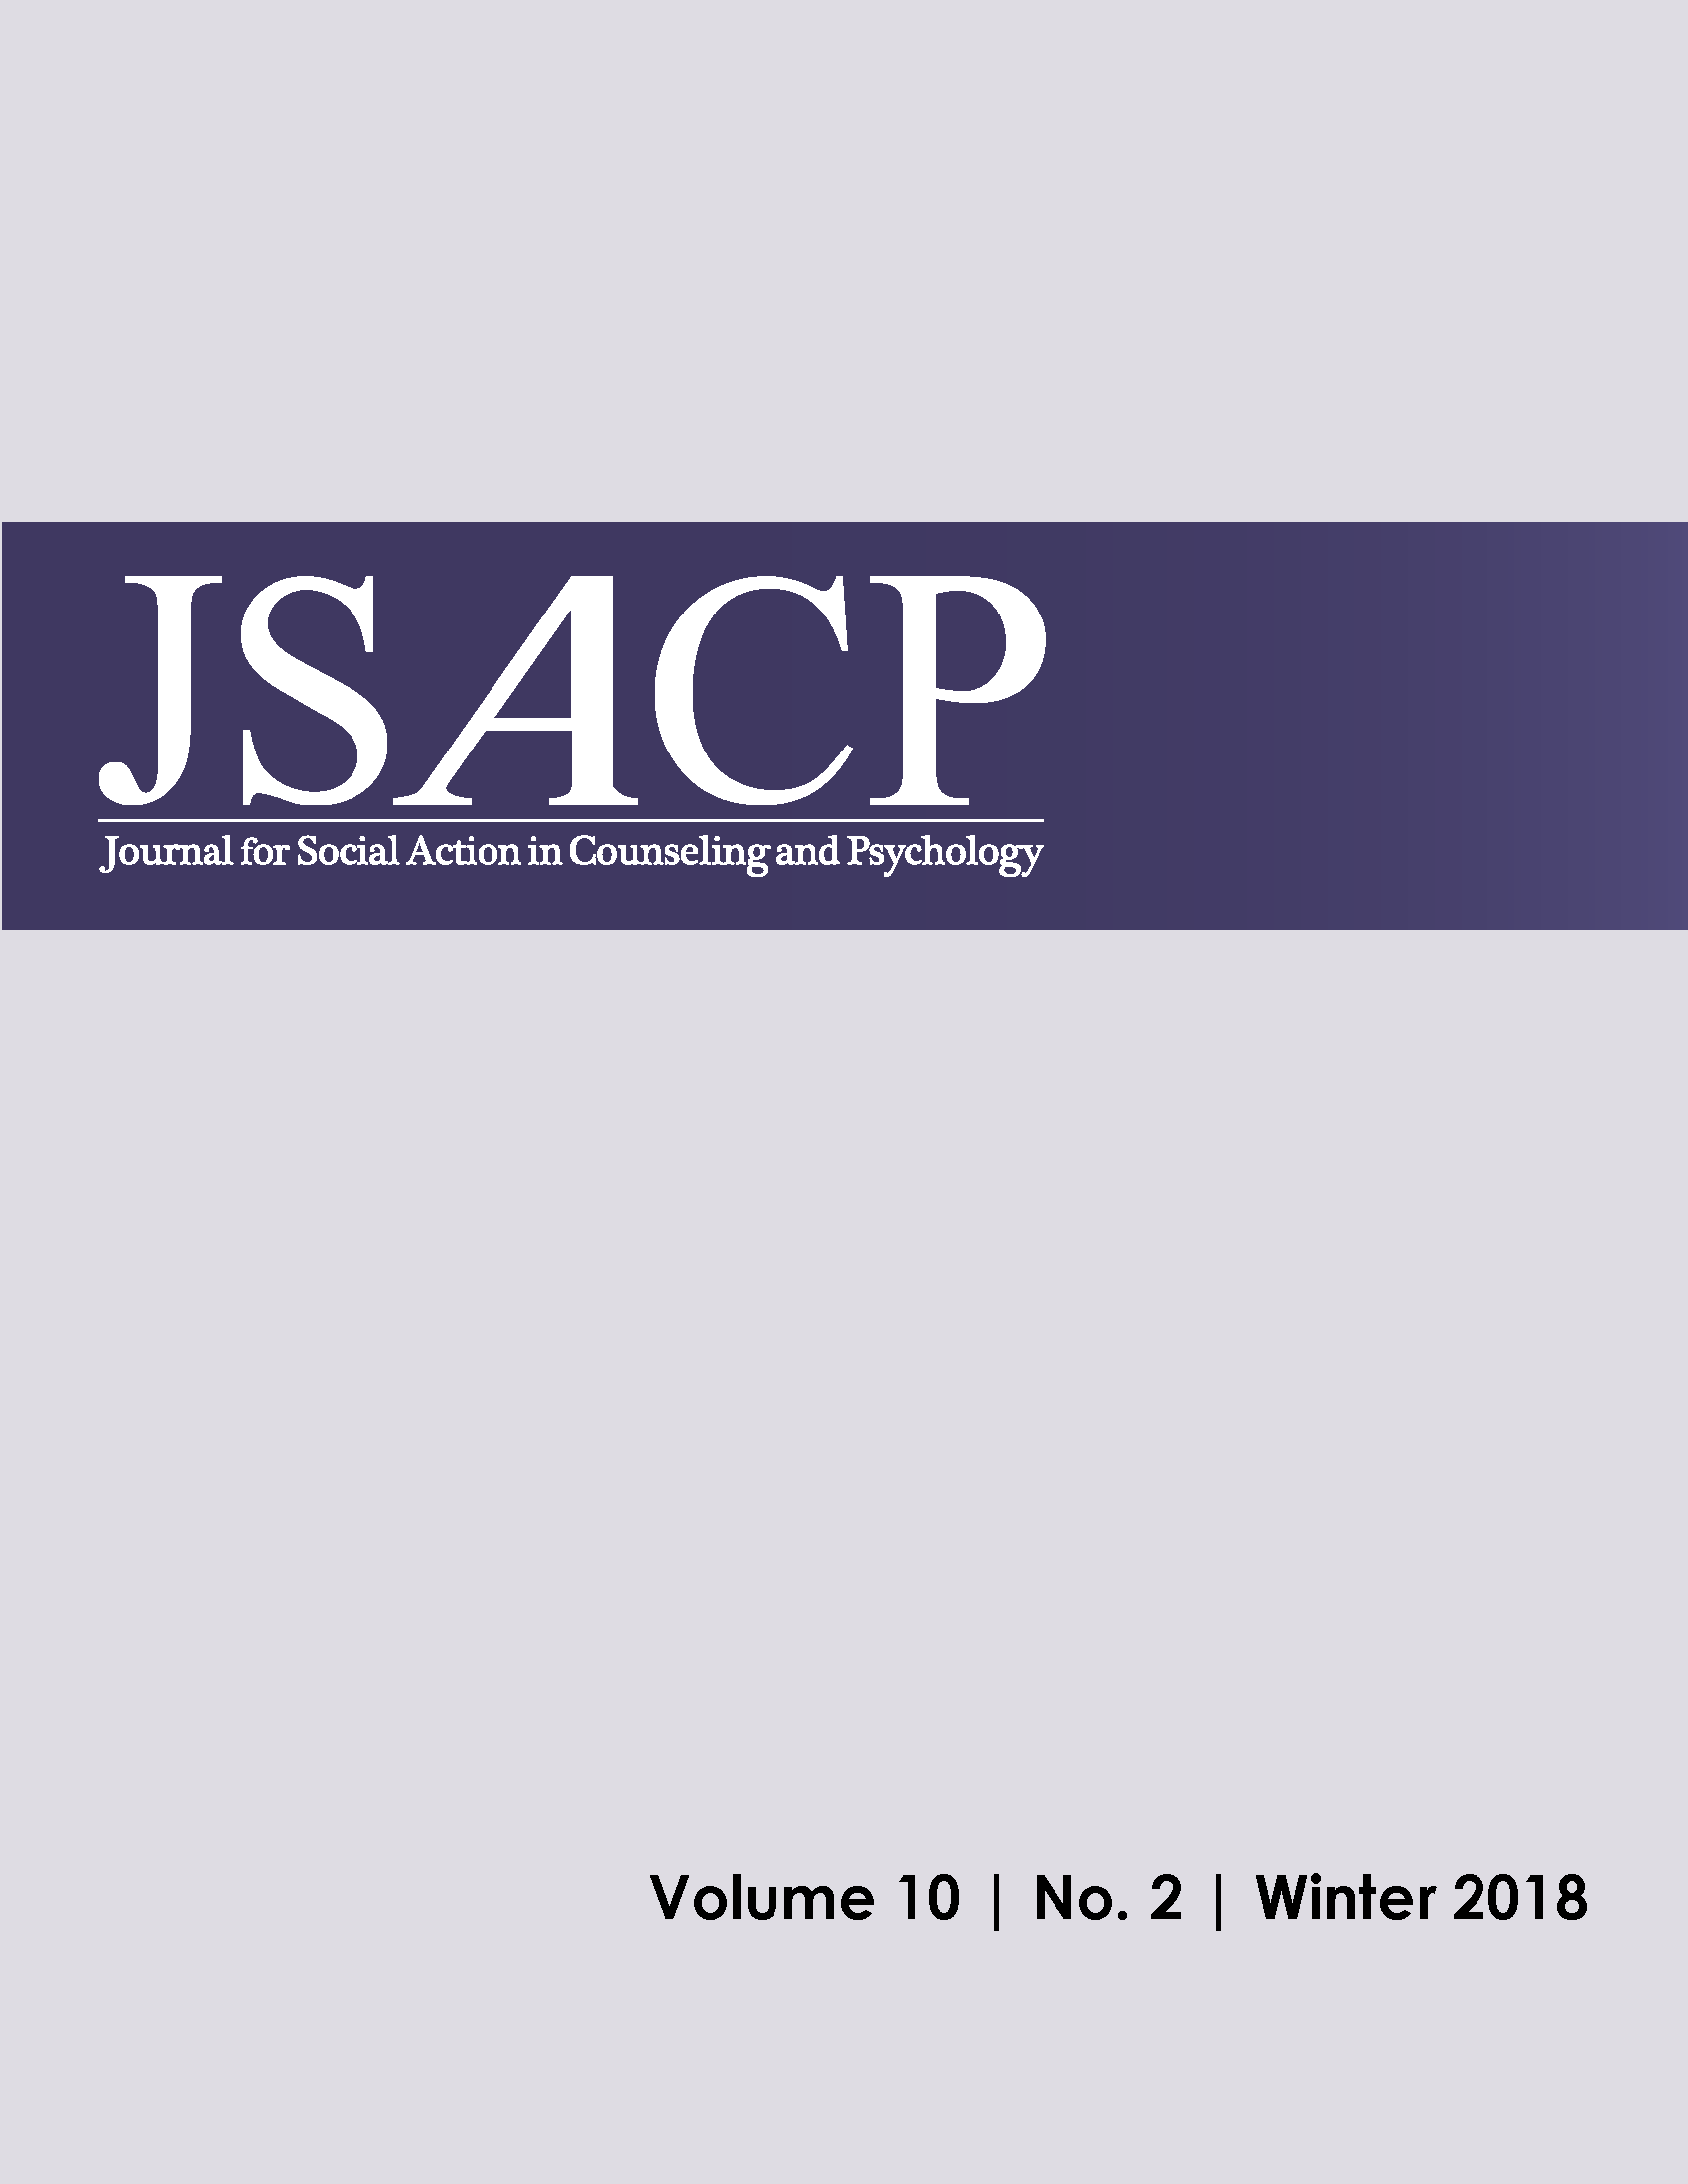 					View Vol. 10 No. 2 (2018): Journal for Social Action in Counseling and Psychology, Winter 2018
				